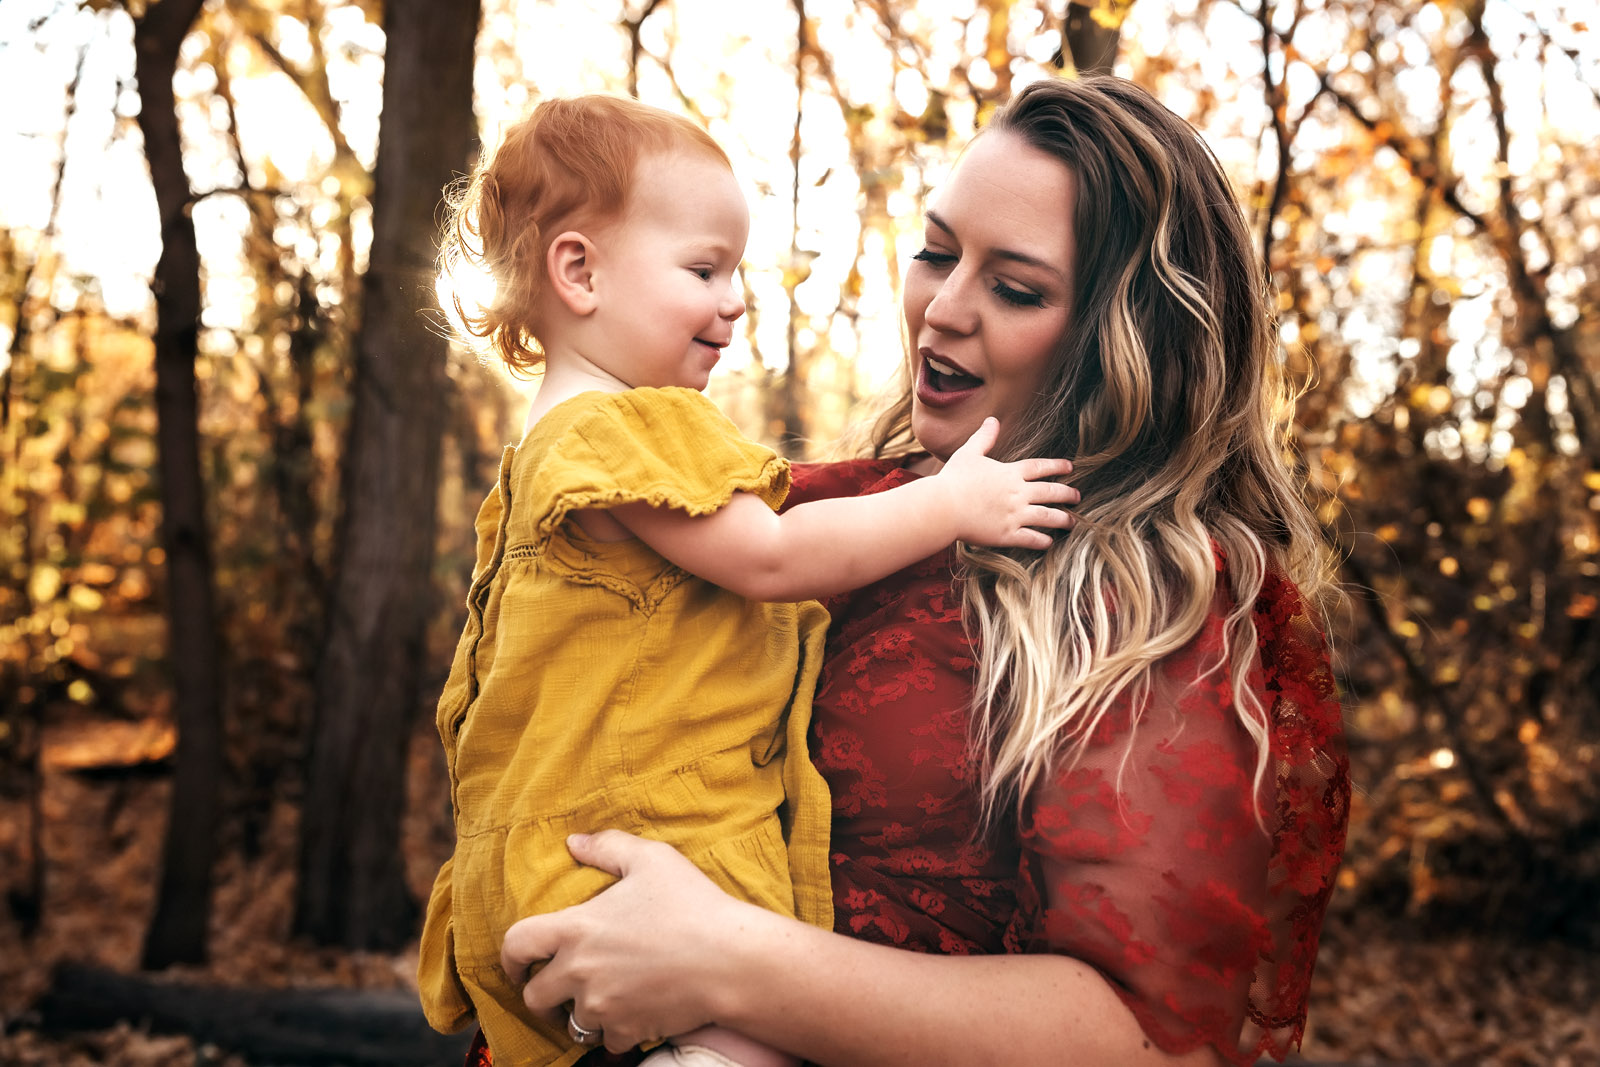 Mom wearing red dress holding baby girl with red hair and yellow dress who is touching mom's hair